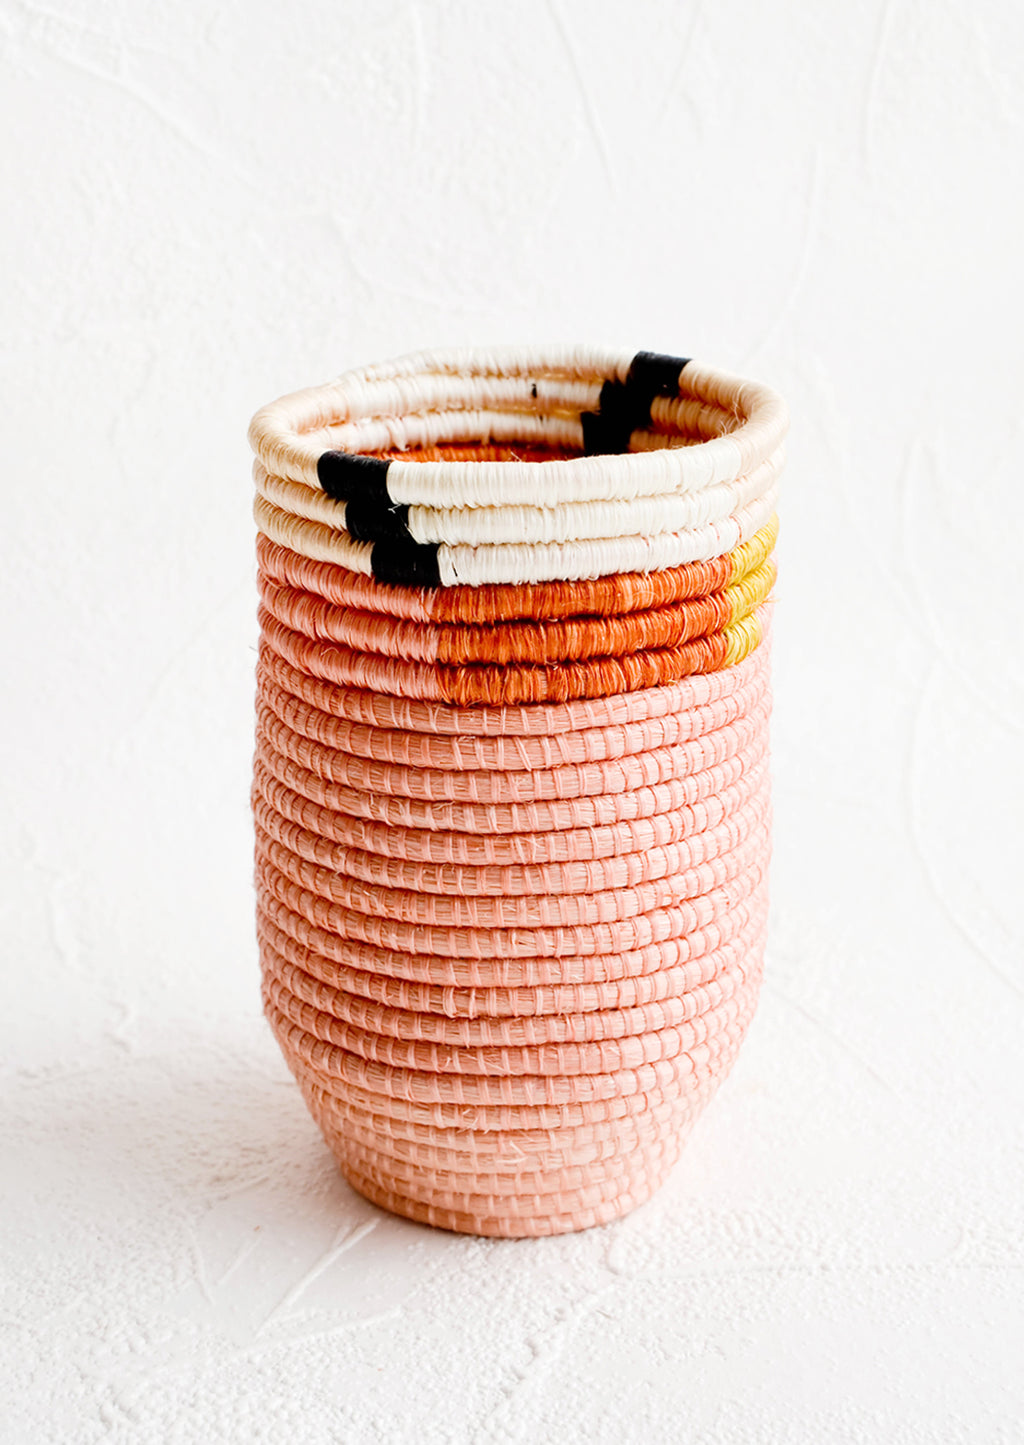 1: Pencil cup shaped woven sweetgrass basket in pink color combo with geometric trim